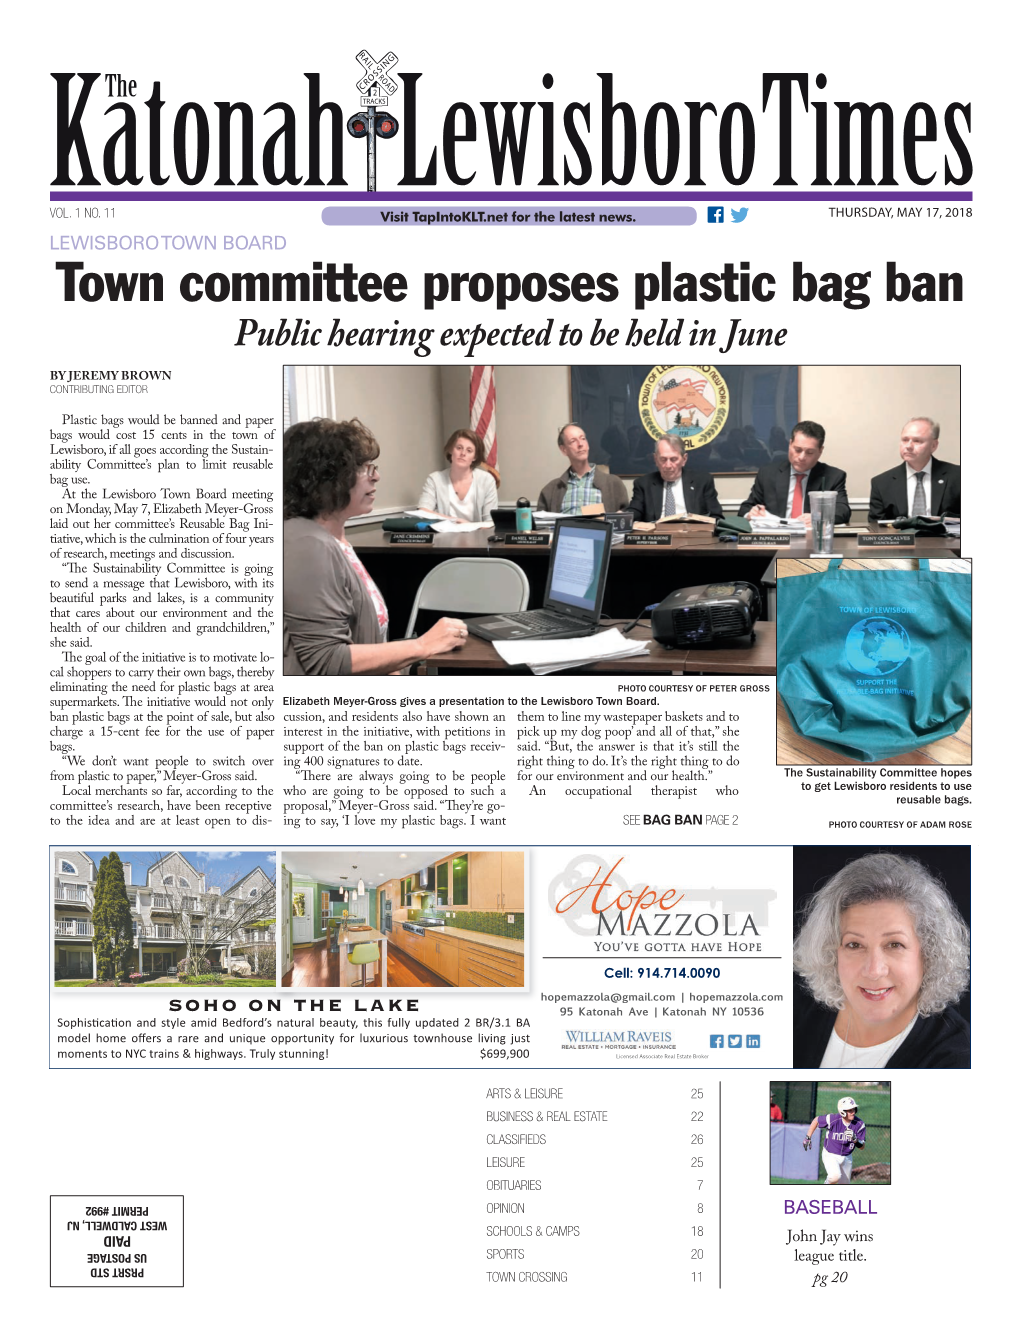 Town Committee Proposes Plastic Bag Ban Public Hearing Expected to Be Held in June by JEREMY BROWN CONTRIBUTING EDITOR